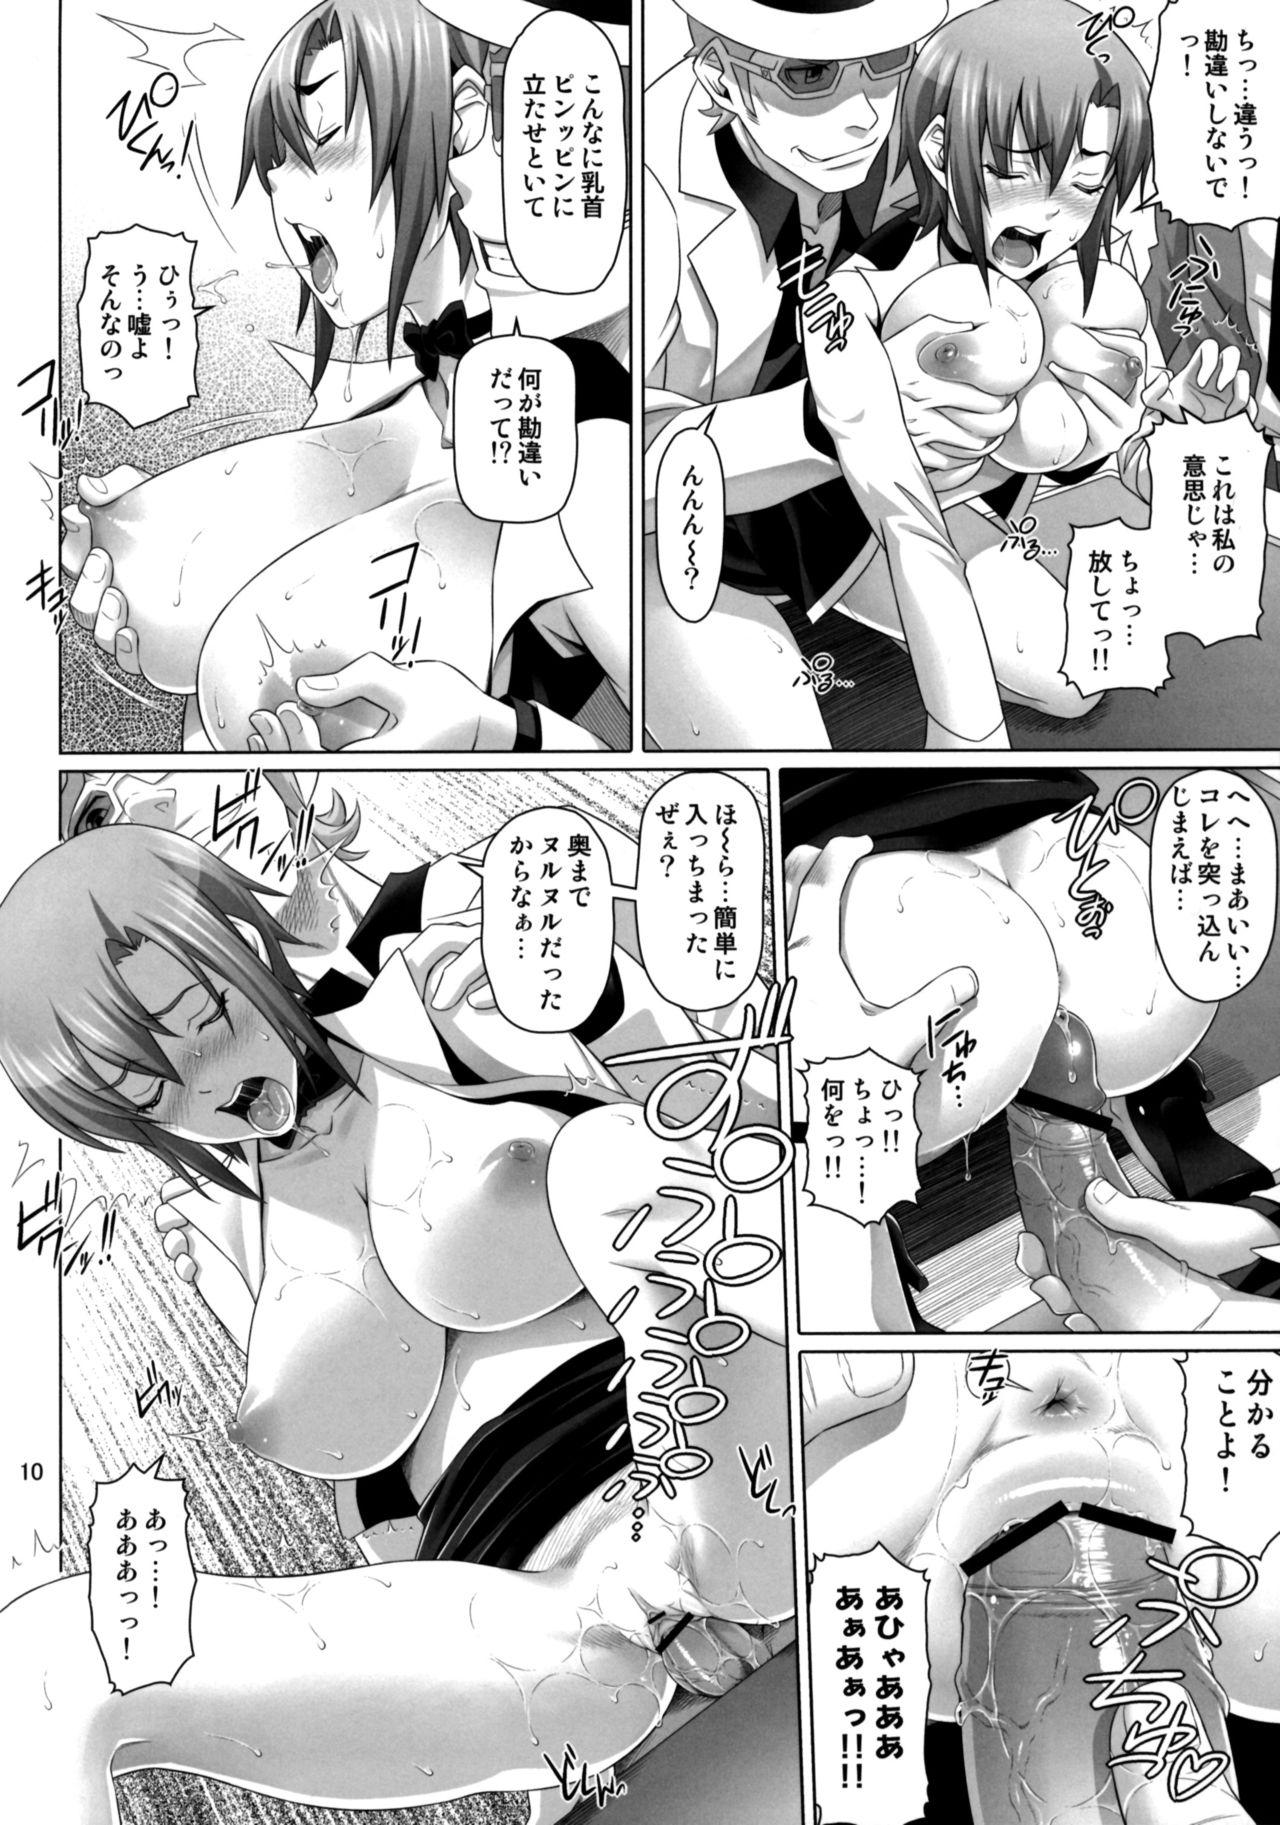 Old Young Rio Sexy Gate! - Super black jack | rio rainbow gate Argenta - Page 9